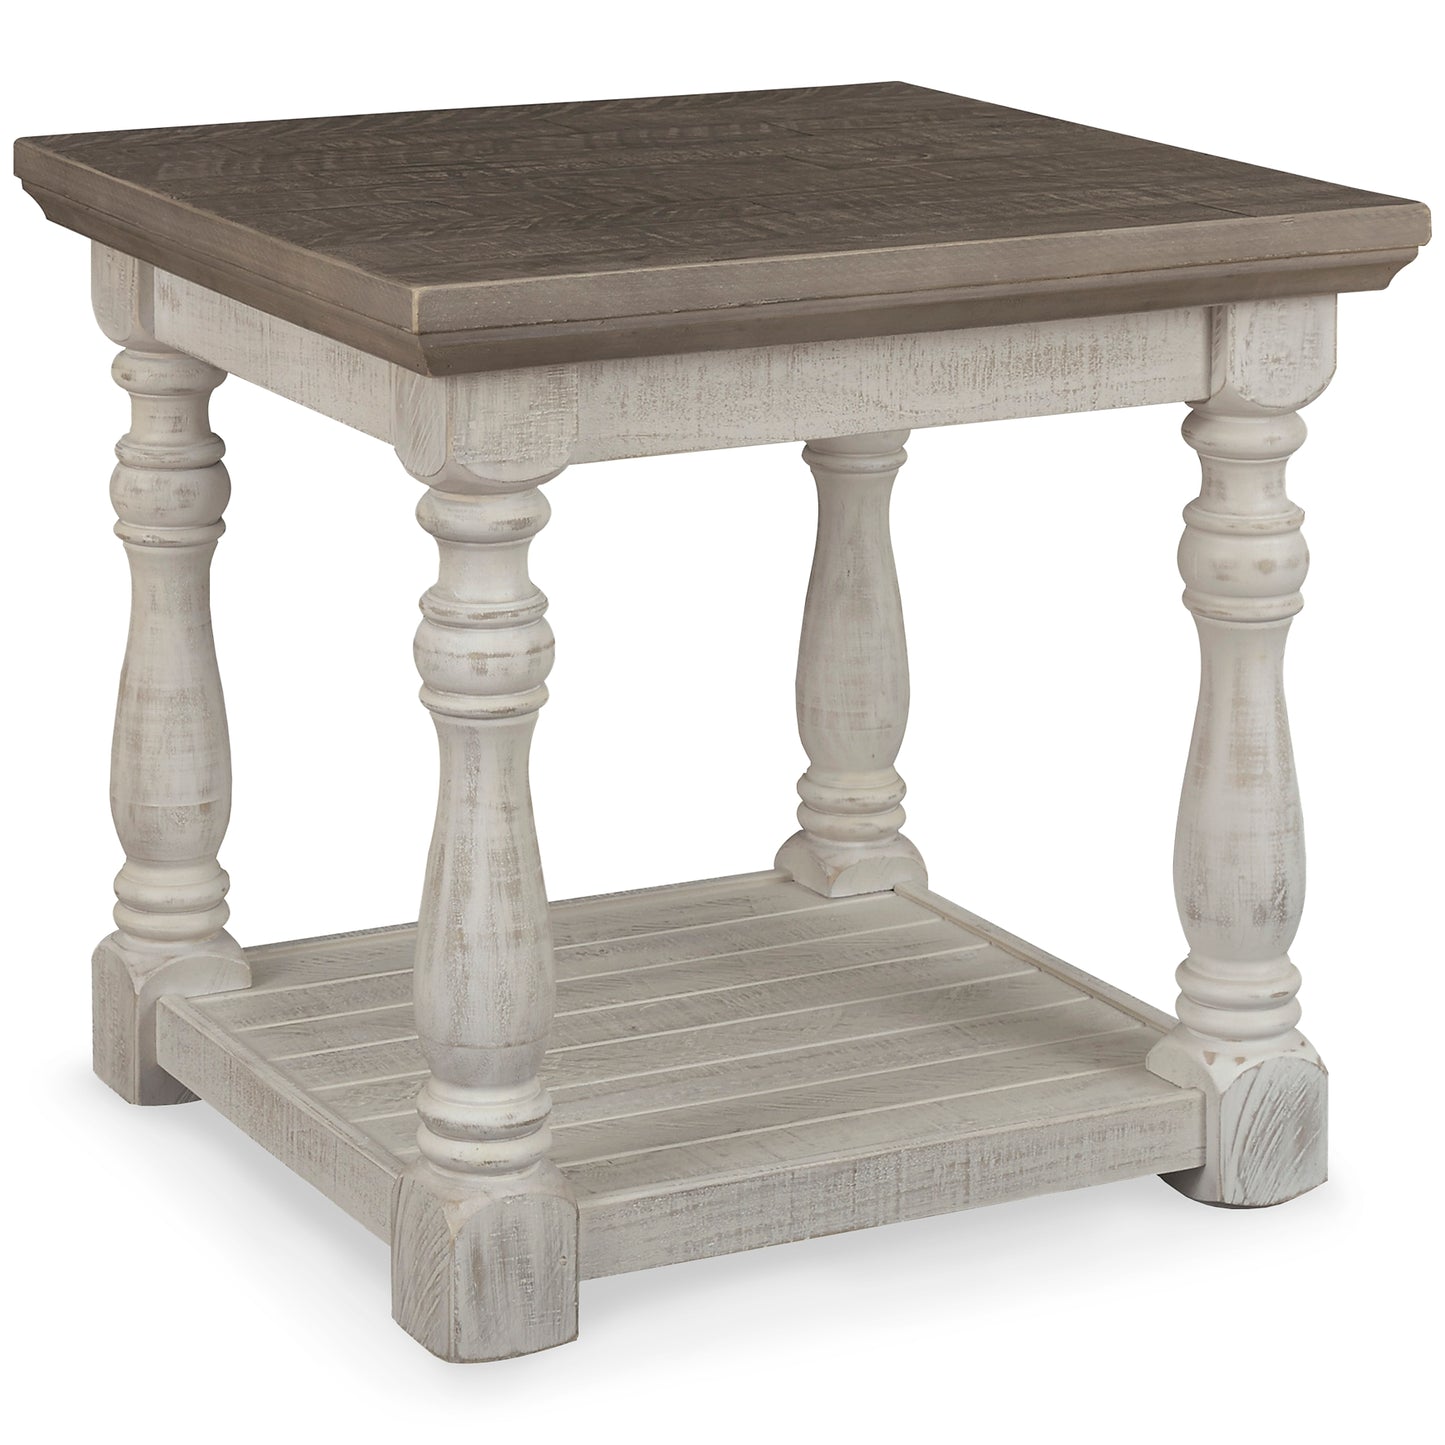 Havalance Coffee Table with 2 End Tables JB's Furniture  Home Furniture, Home Decor, Furniture Store